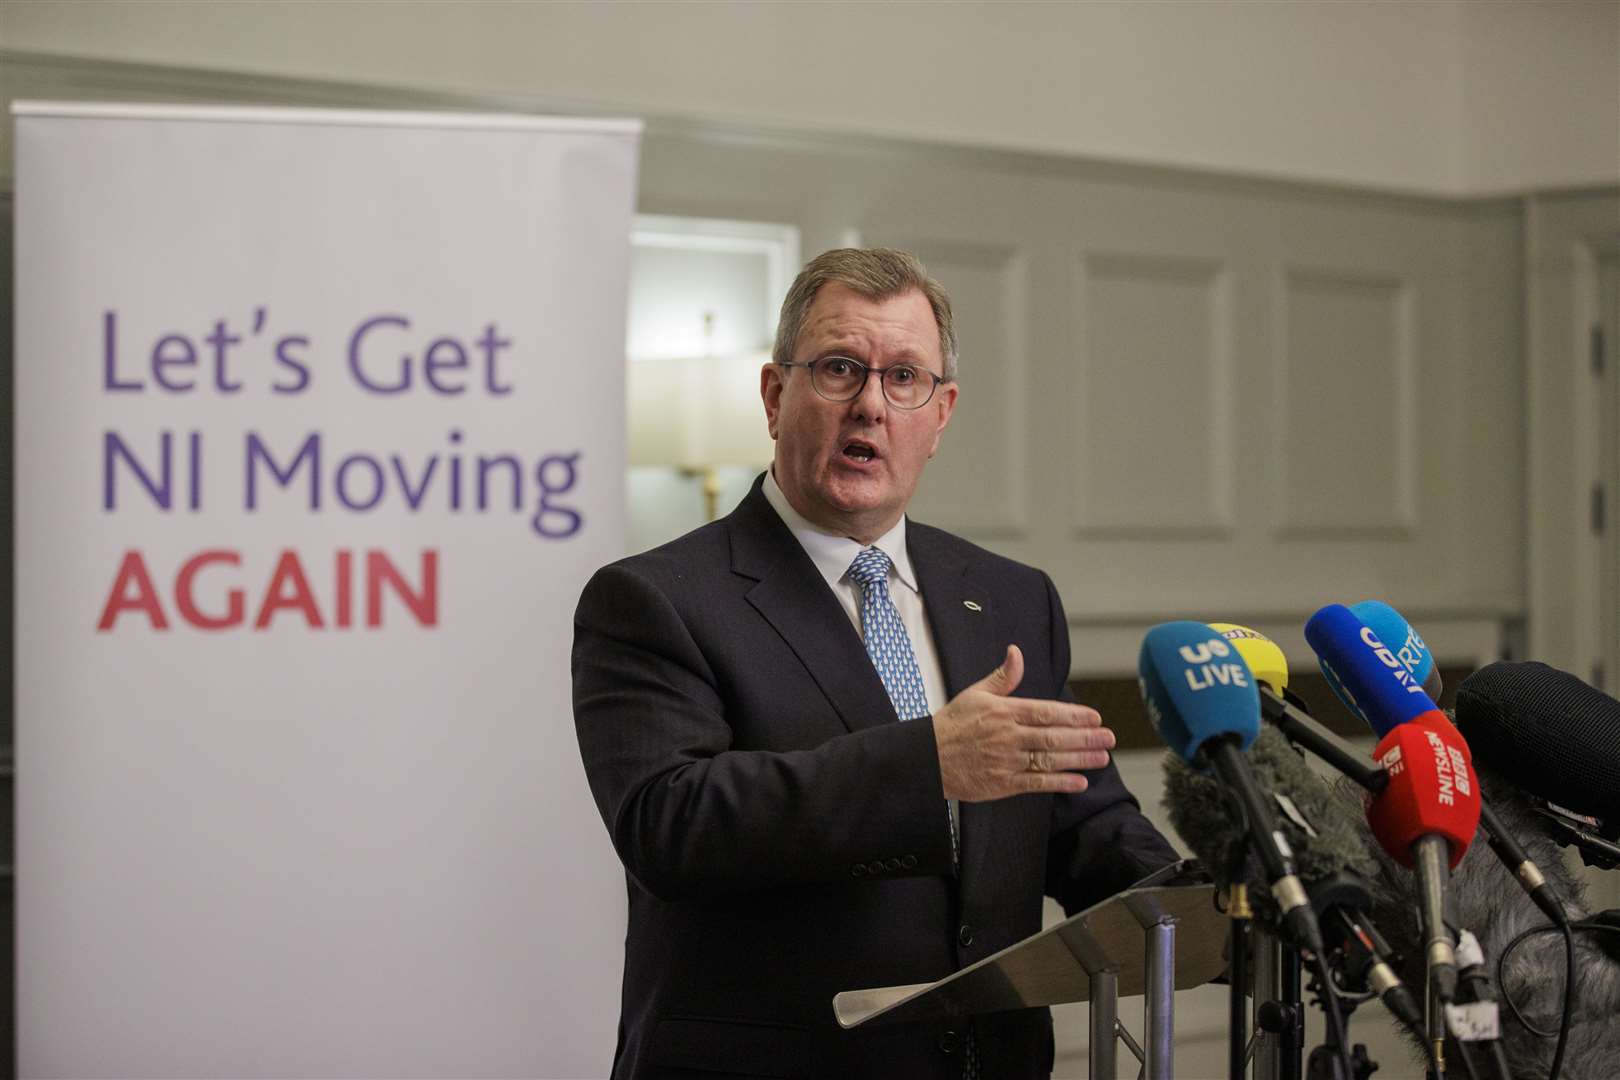 DUP leader Sir Jeffery Donaldson announced his deal at a 1am press conference in Co Down (Liam McBurney/PA)